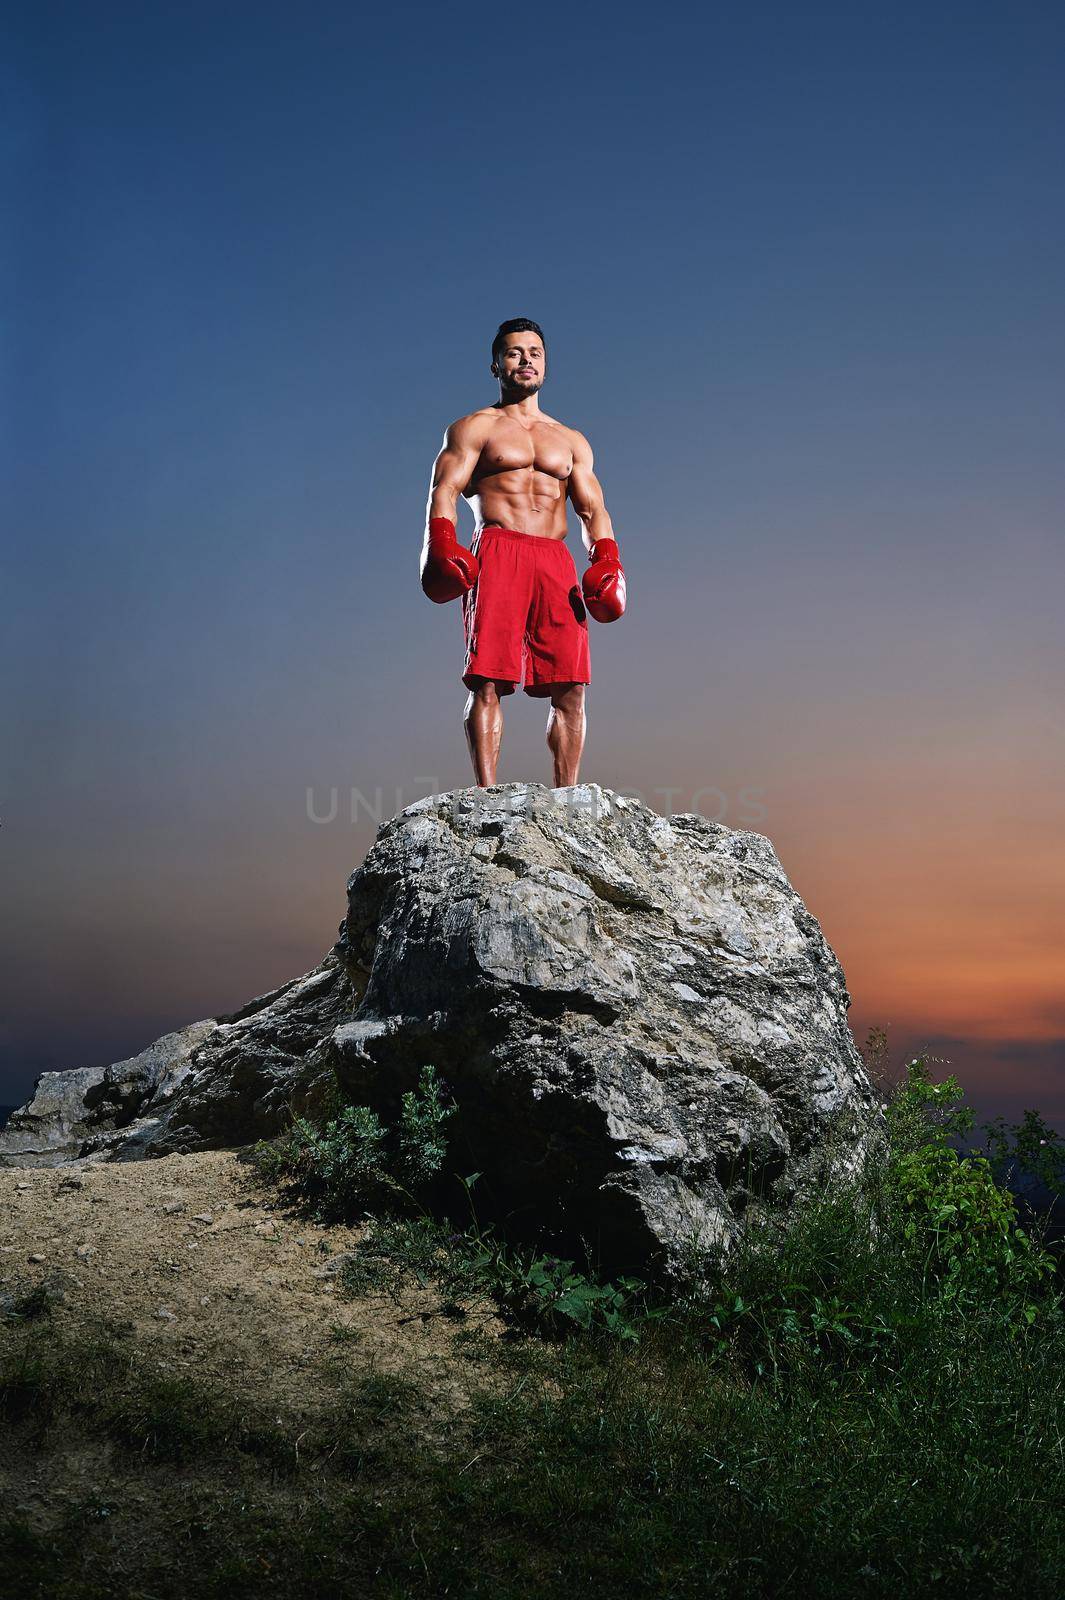 Young muscular male fighter wearing boxing gloves standing in a stance on a rock outdoors on sunset copyspace people lifestyle sports athletics sportsman fitness muscles combat martial fighting.